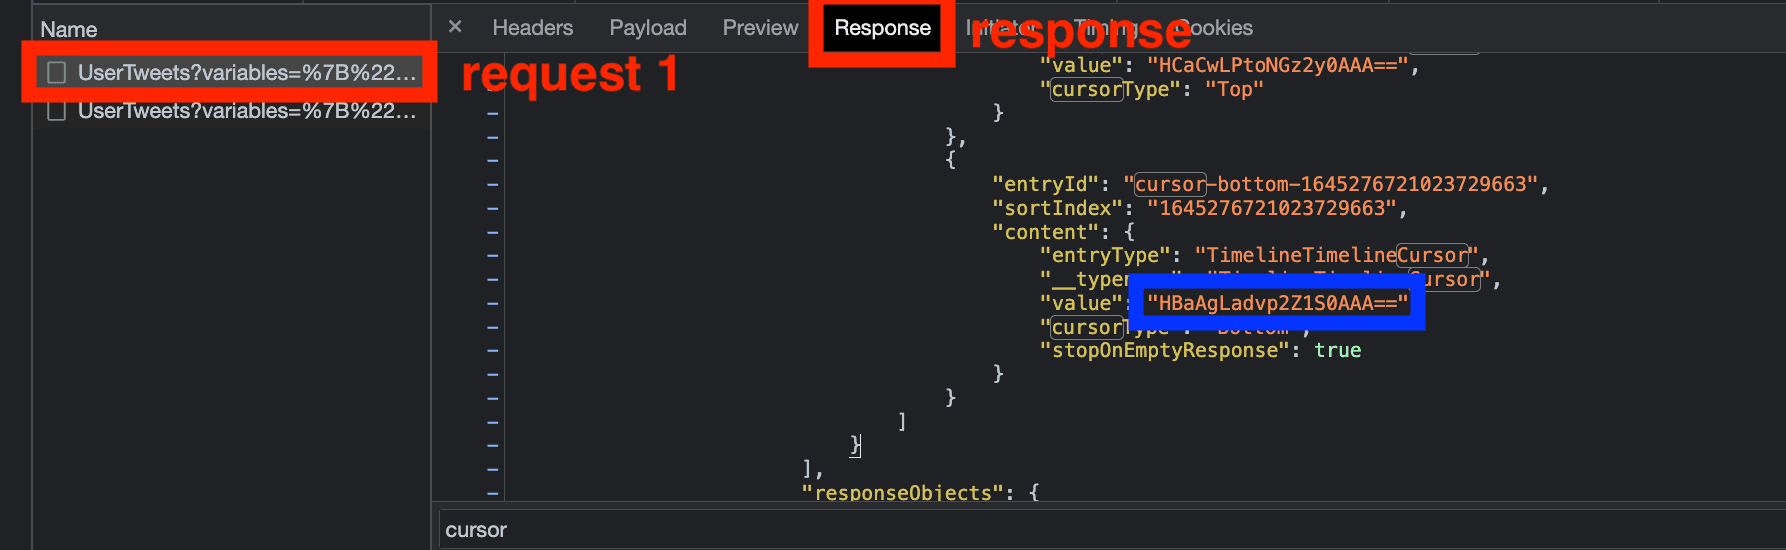 how-to-scrape-tweets-with-python-and-requests-in-2023-image9.png